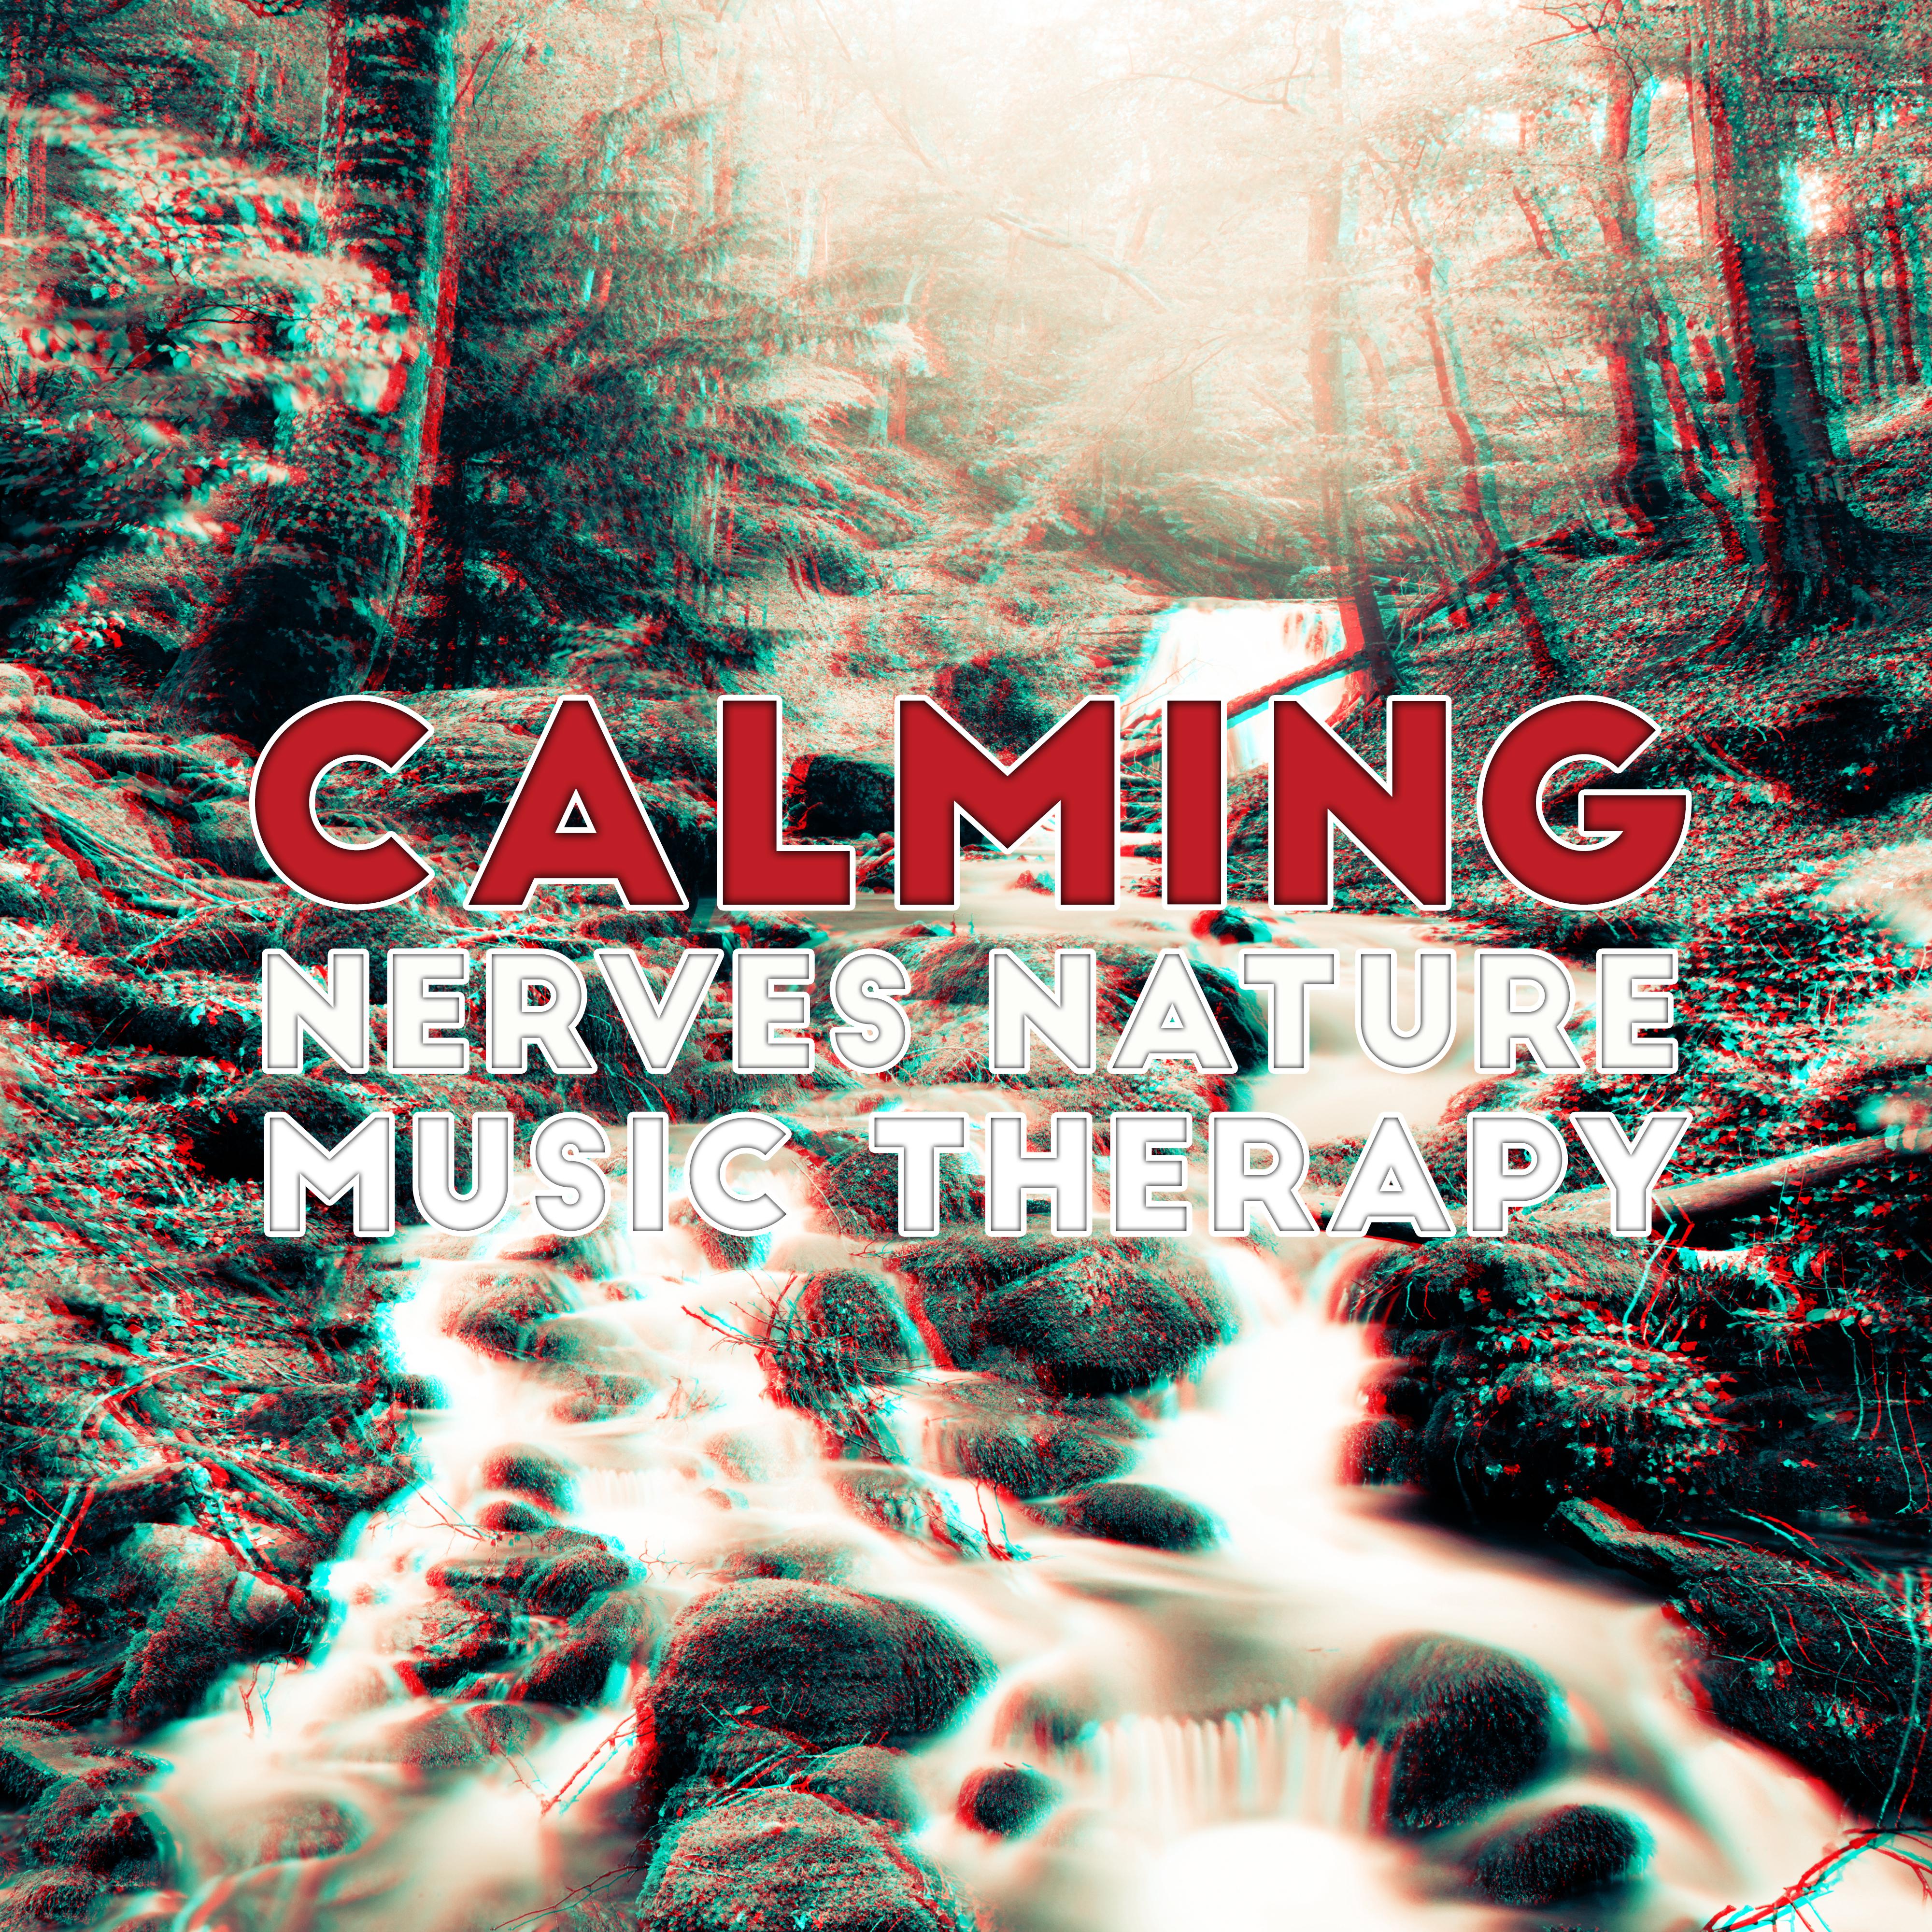 Calming Nerves Nature Music Therapy: 2019 New Age Music for Total Relax, Calming Down, Stress Relief, Improve Your Mood, Nature Sounds of Forest, Meadow, Birds, Water, Soothing Piano Melodies